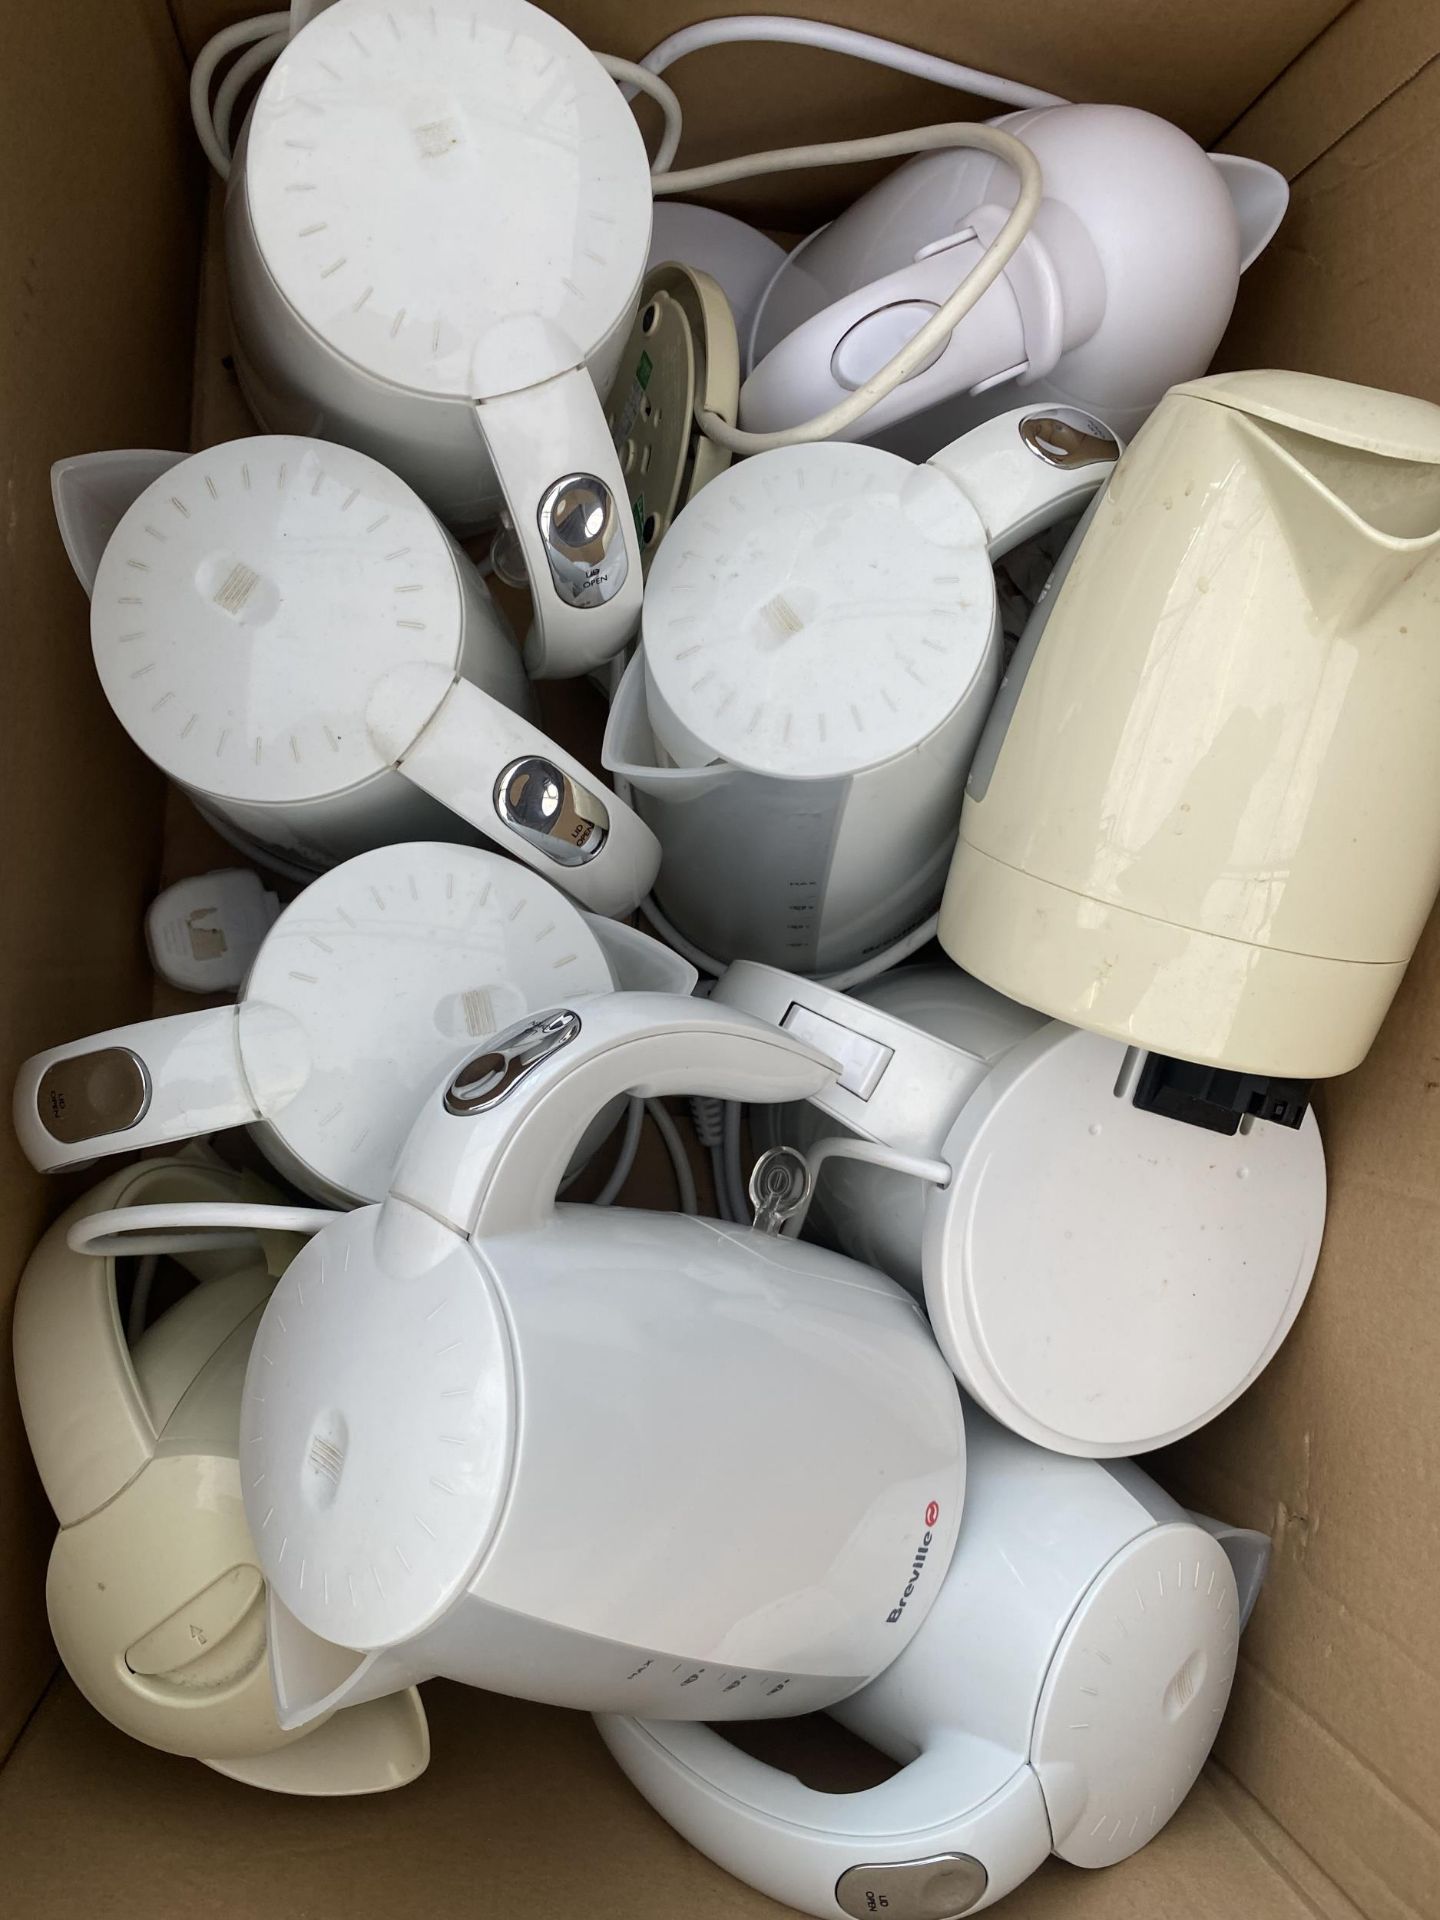 A LARGE COLLECTION OF KETTLES - Image 2 of 4